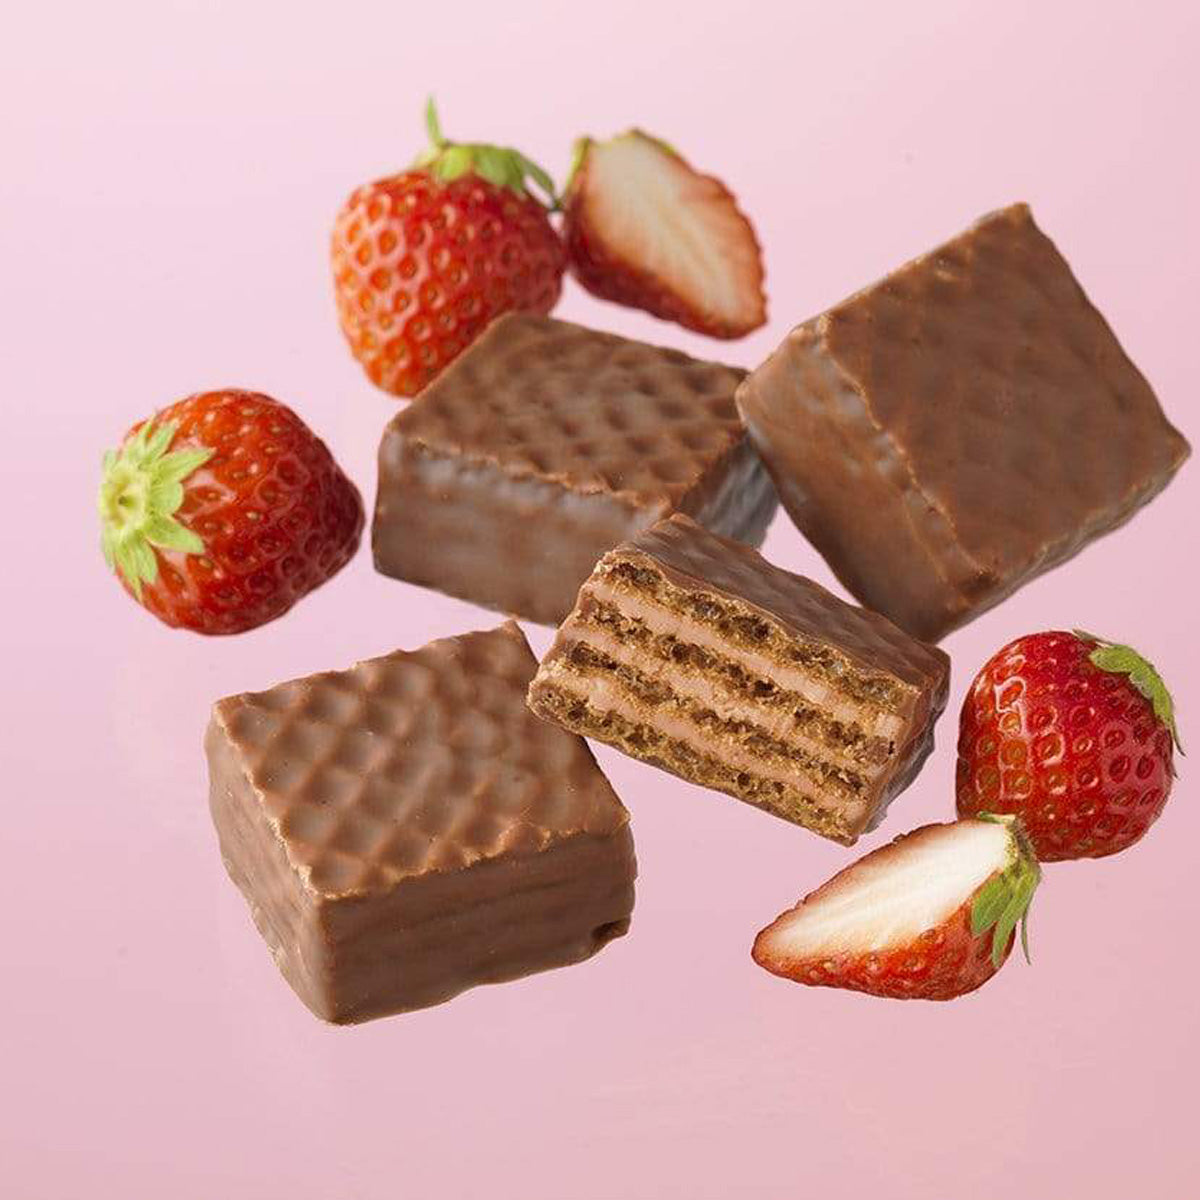 ROYCE' Chocolate - Chocolate Wafers "Strawberry Cream" - Image shows brown chocolate wafers with crisscrossed texture. Accents include red strawberries. Background is in pink color.